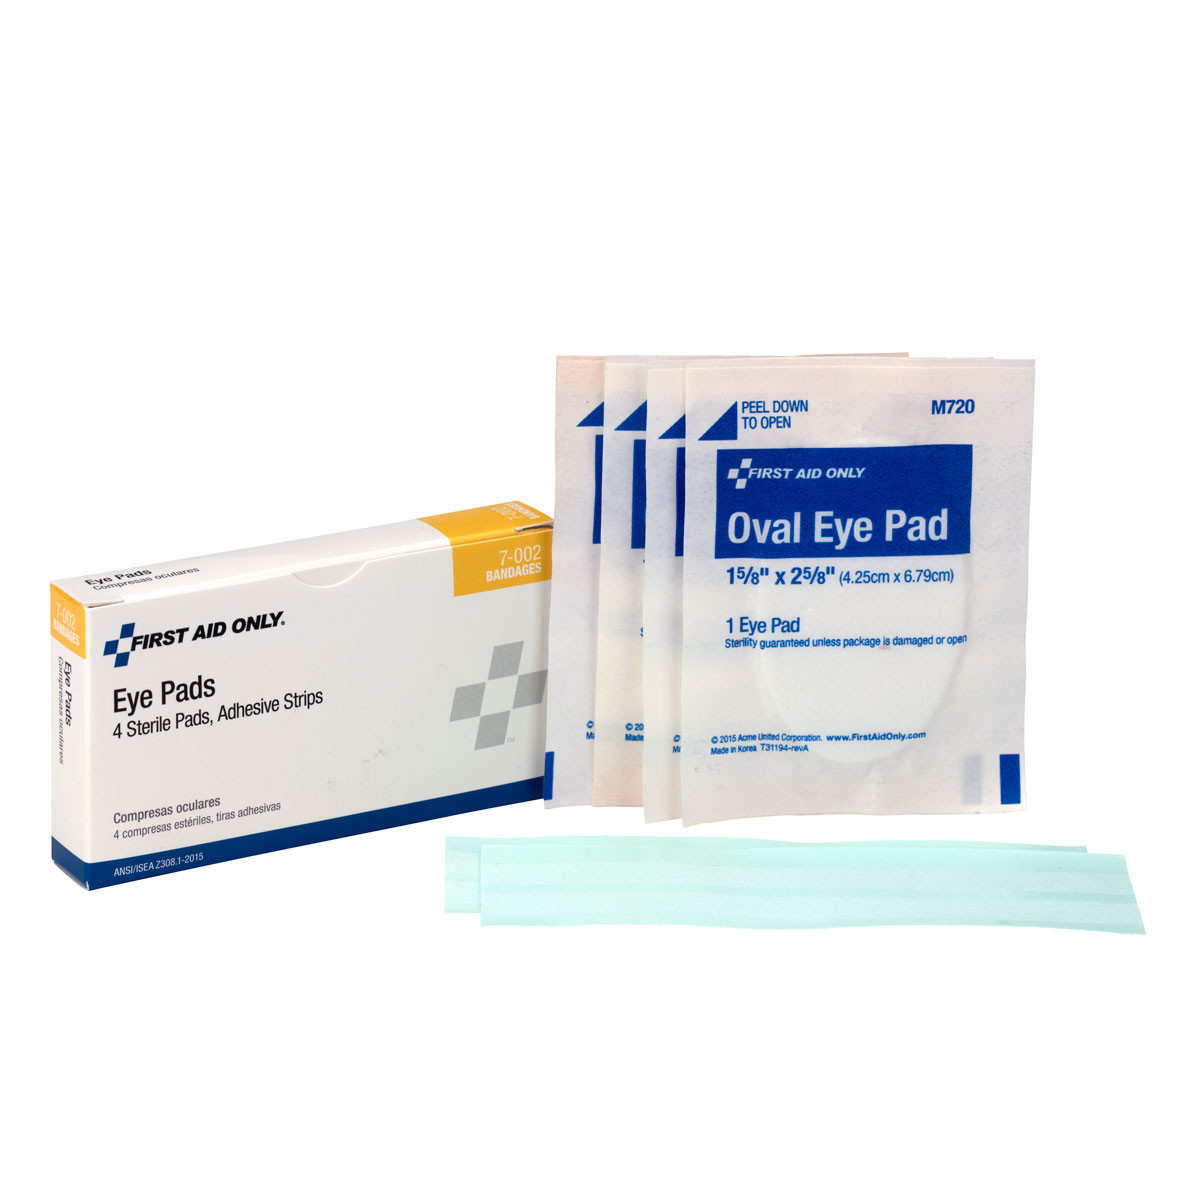 Sterile Eye Pads with Adhesive Strips